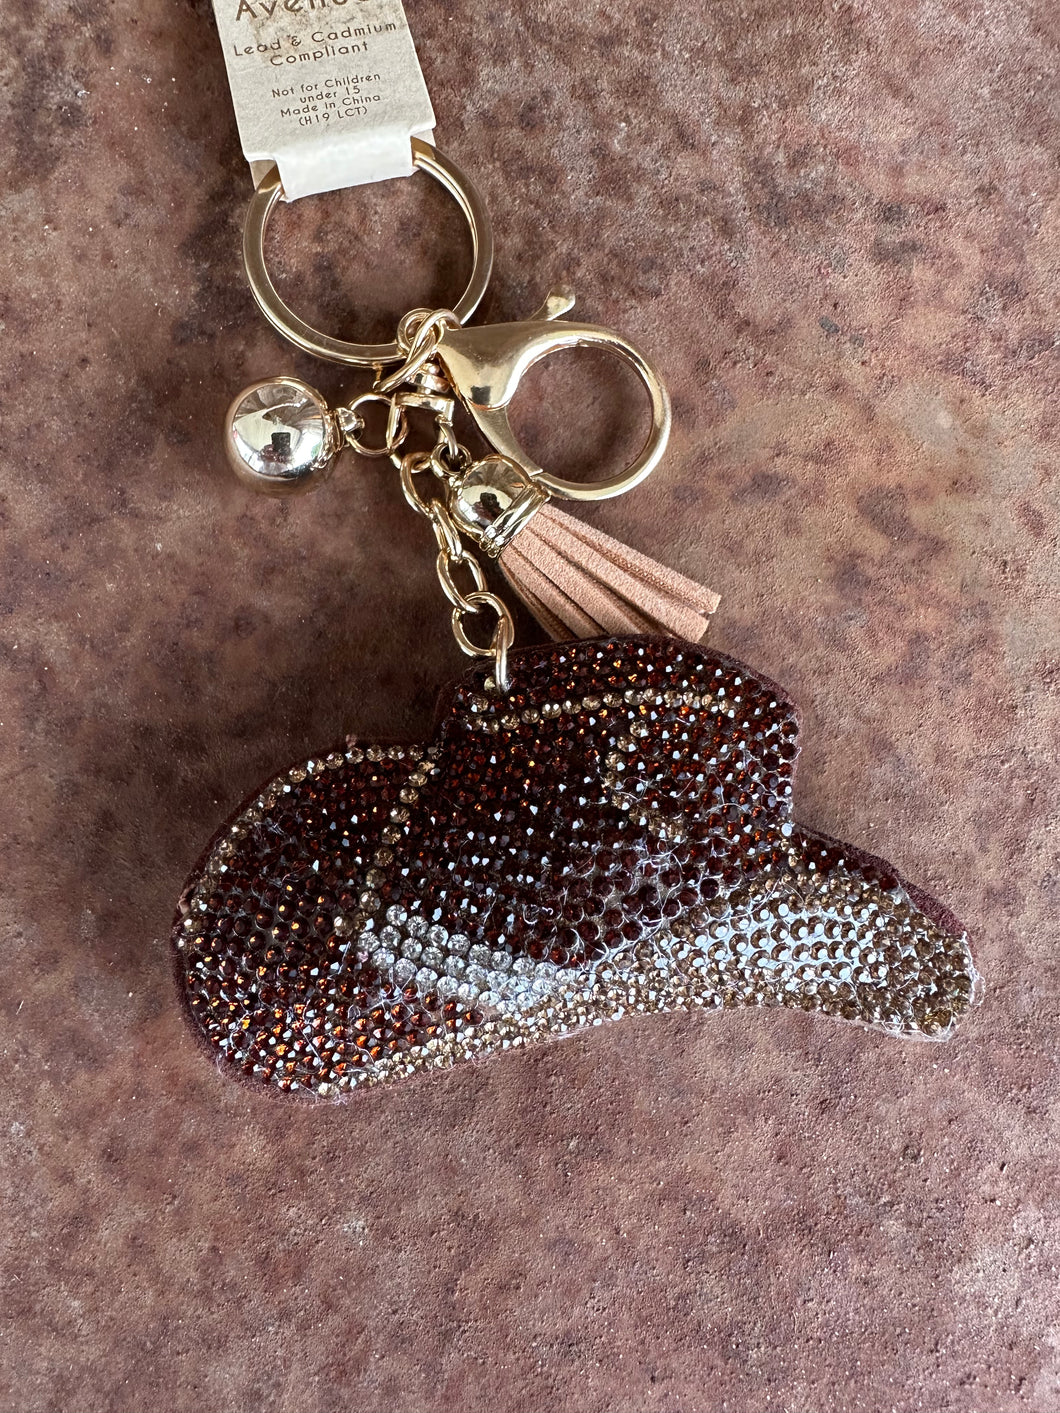 THE BLINGED OUT KEYCHAIN COLLECTION